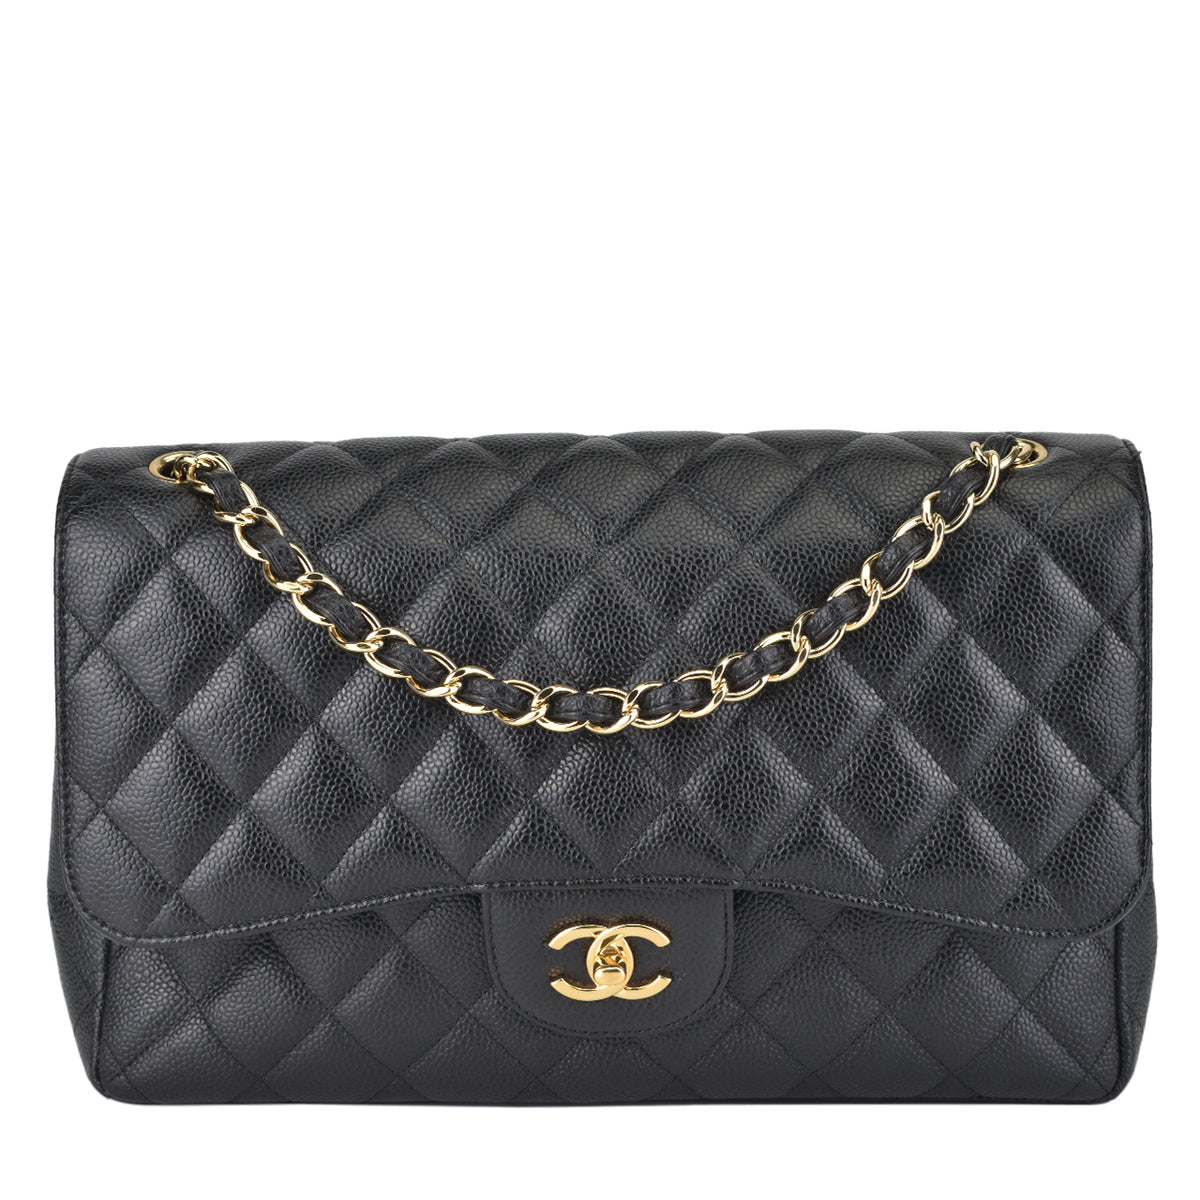 Chanel Camera Bag Small, Iridescent Yellow Caviar Leather with Gold  Hardware, Preowned in Dustbag